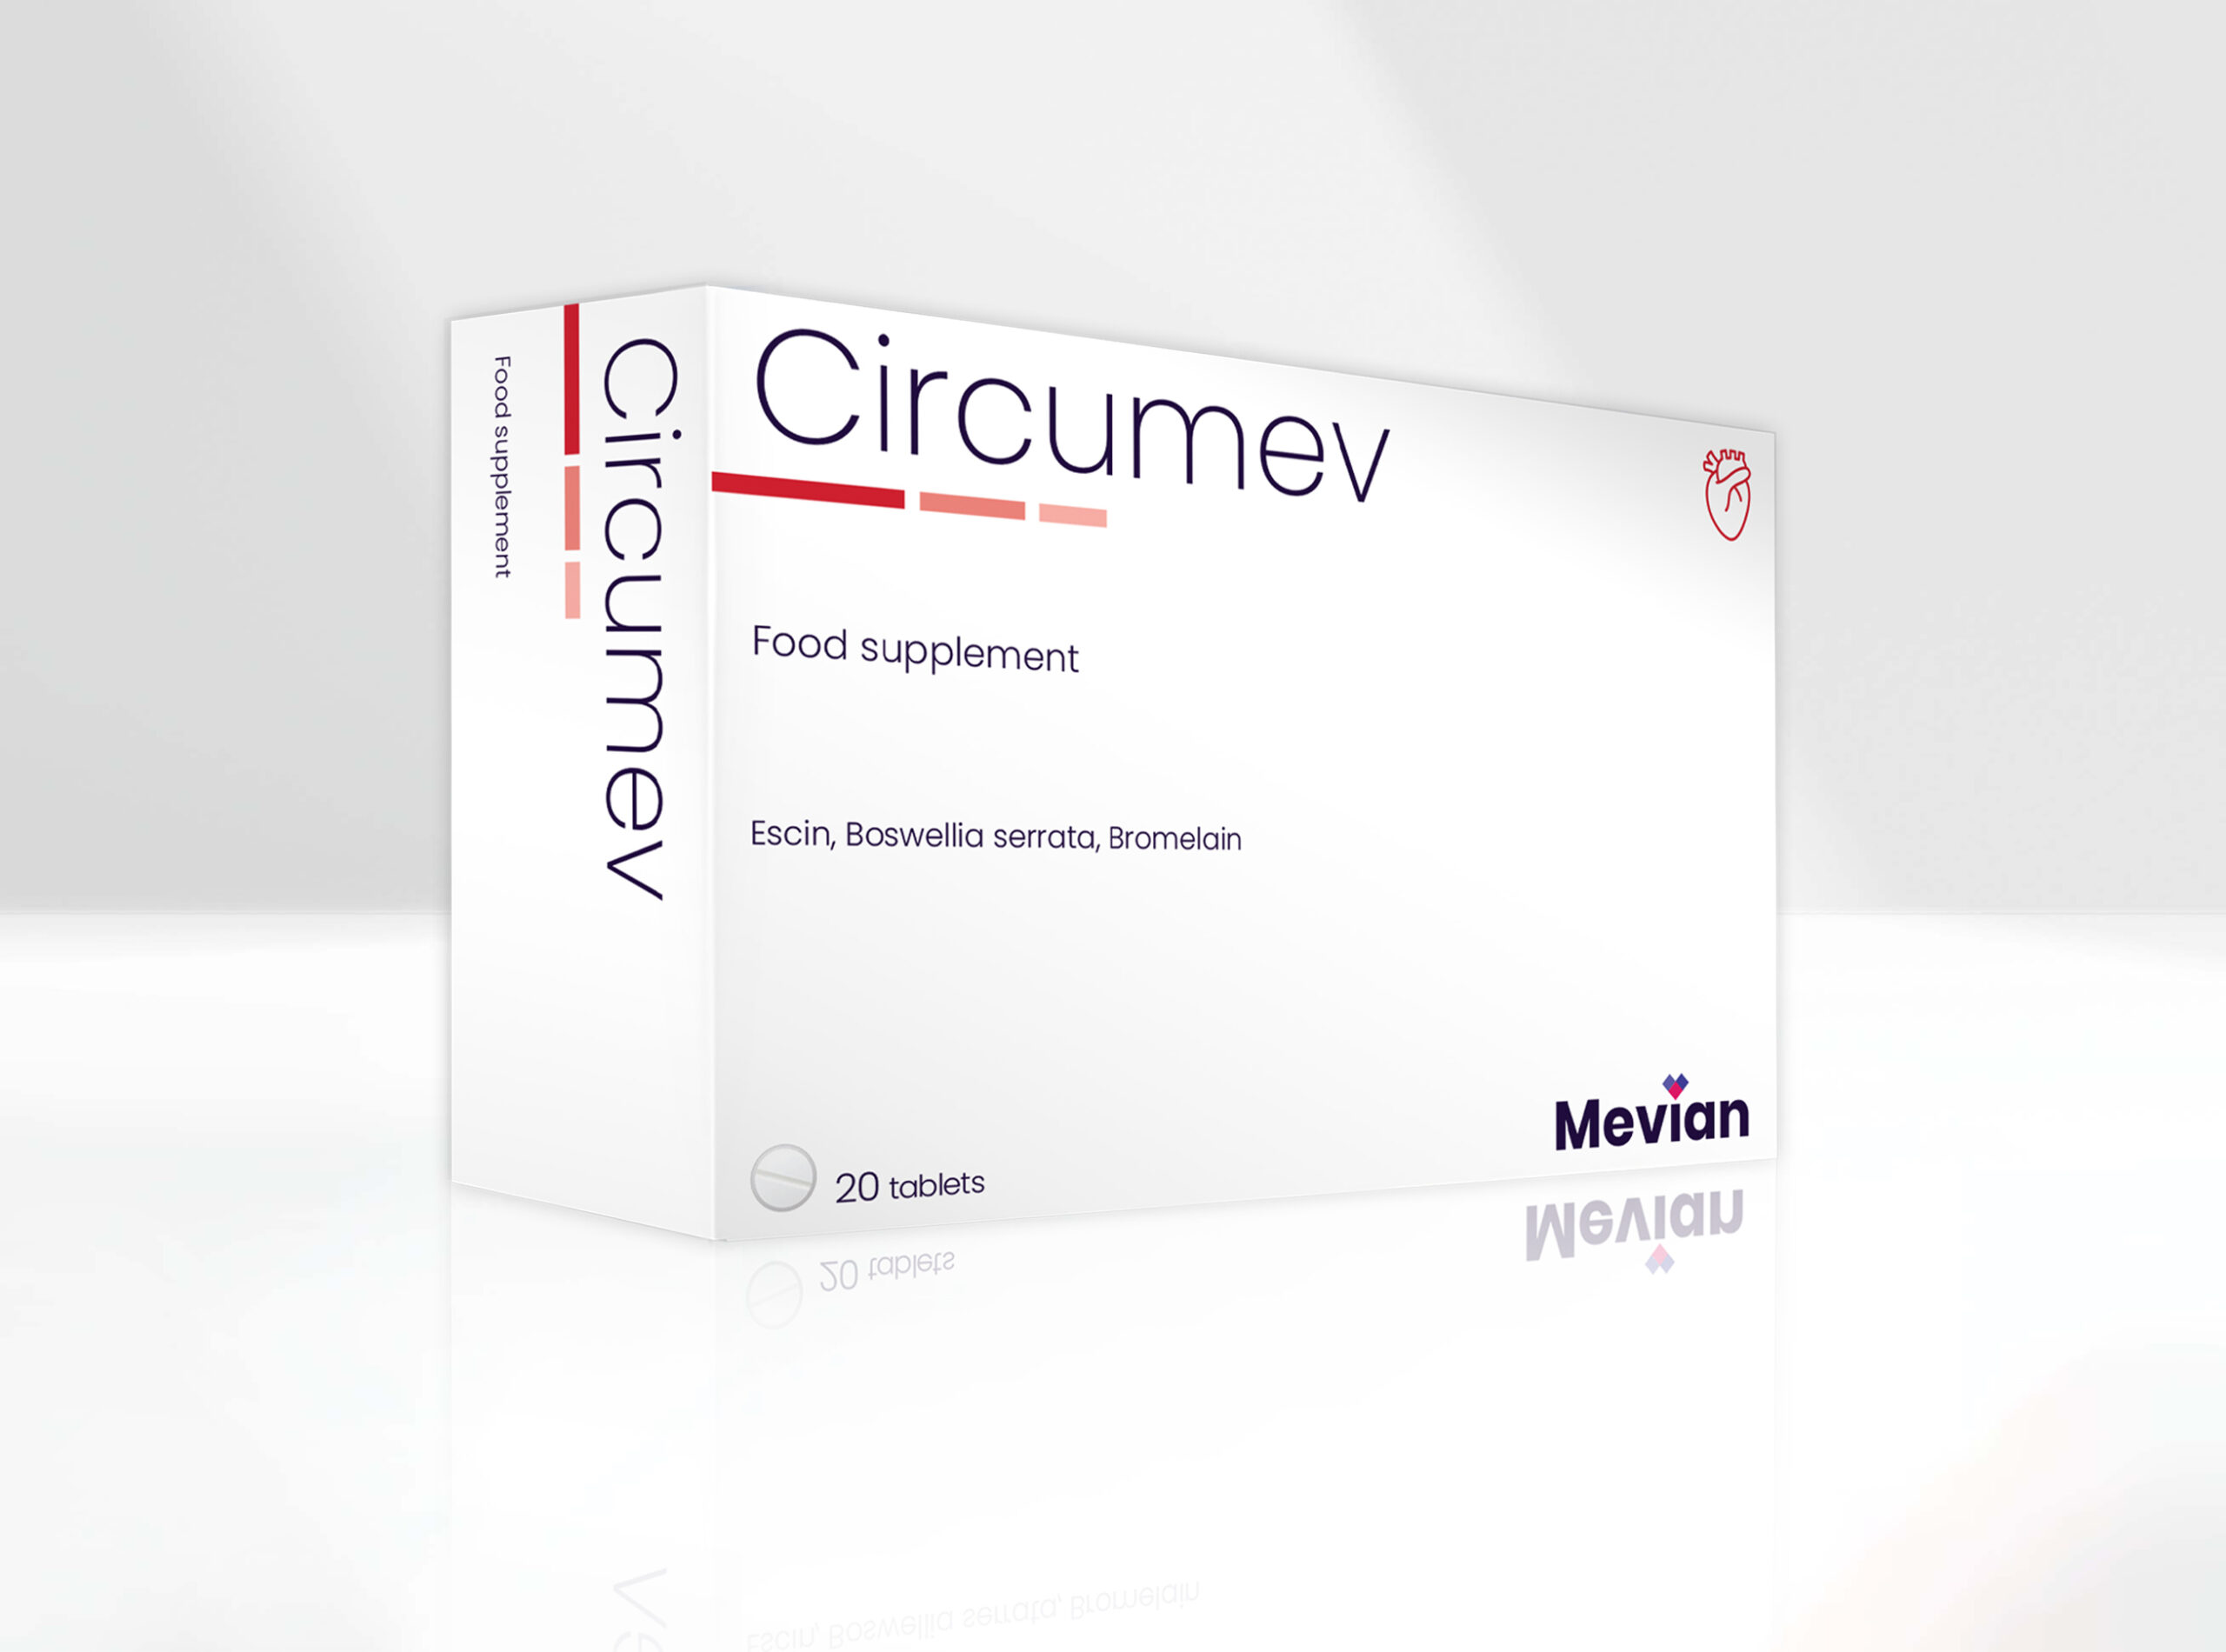 Circumev is ideal that counteracts states of localized tension and promotes microcirculation. Indicated for periods of inflammation and edema of a lymphatic nature.